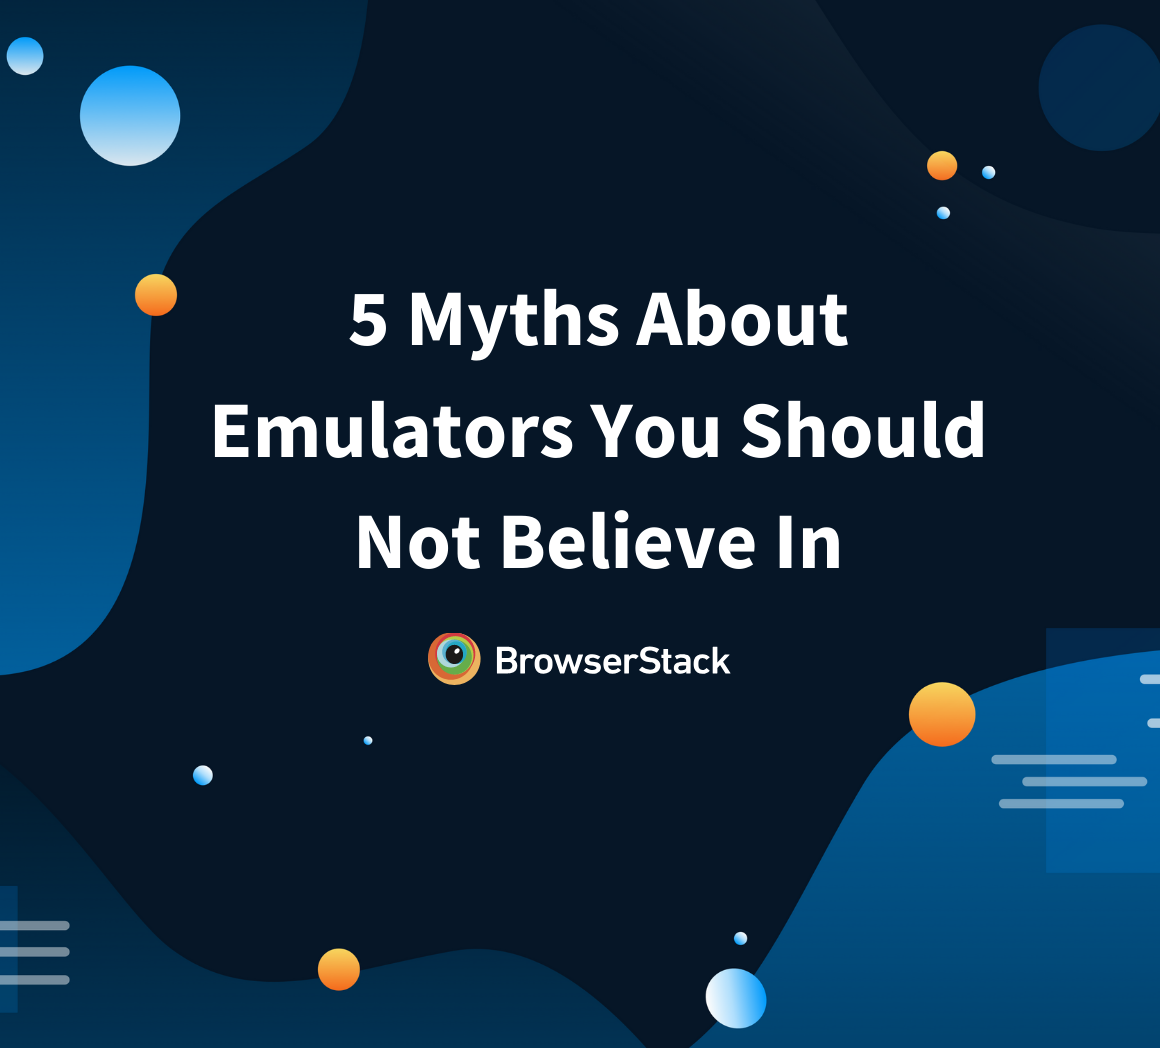 5 Myths in Emulators One Should Not Believe In